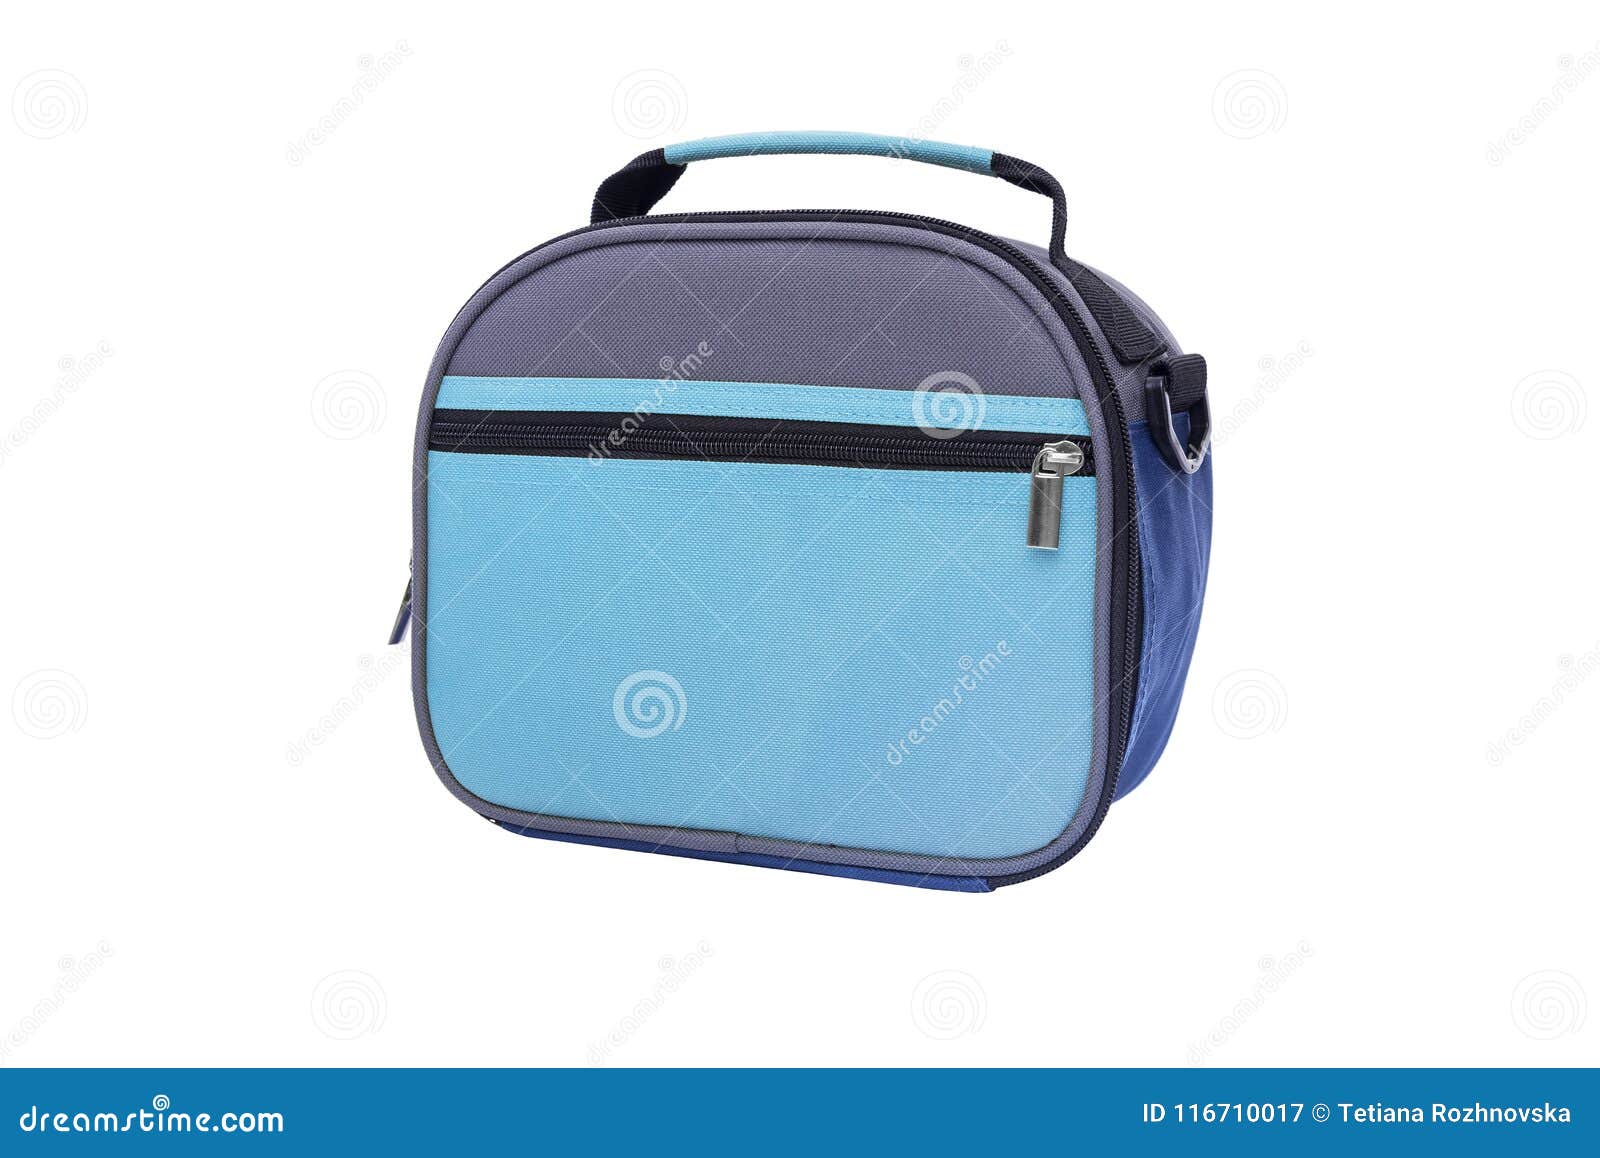 Bag for Lunch on a White Background. Stock Image - Image of blue ...